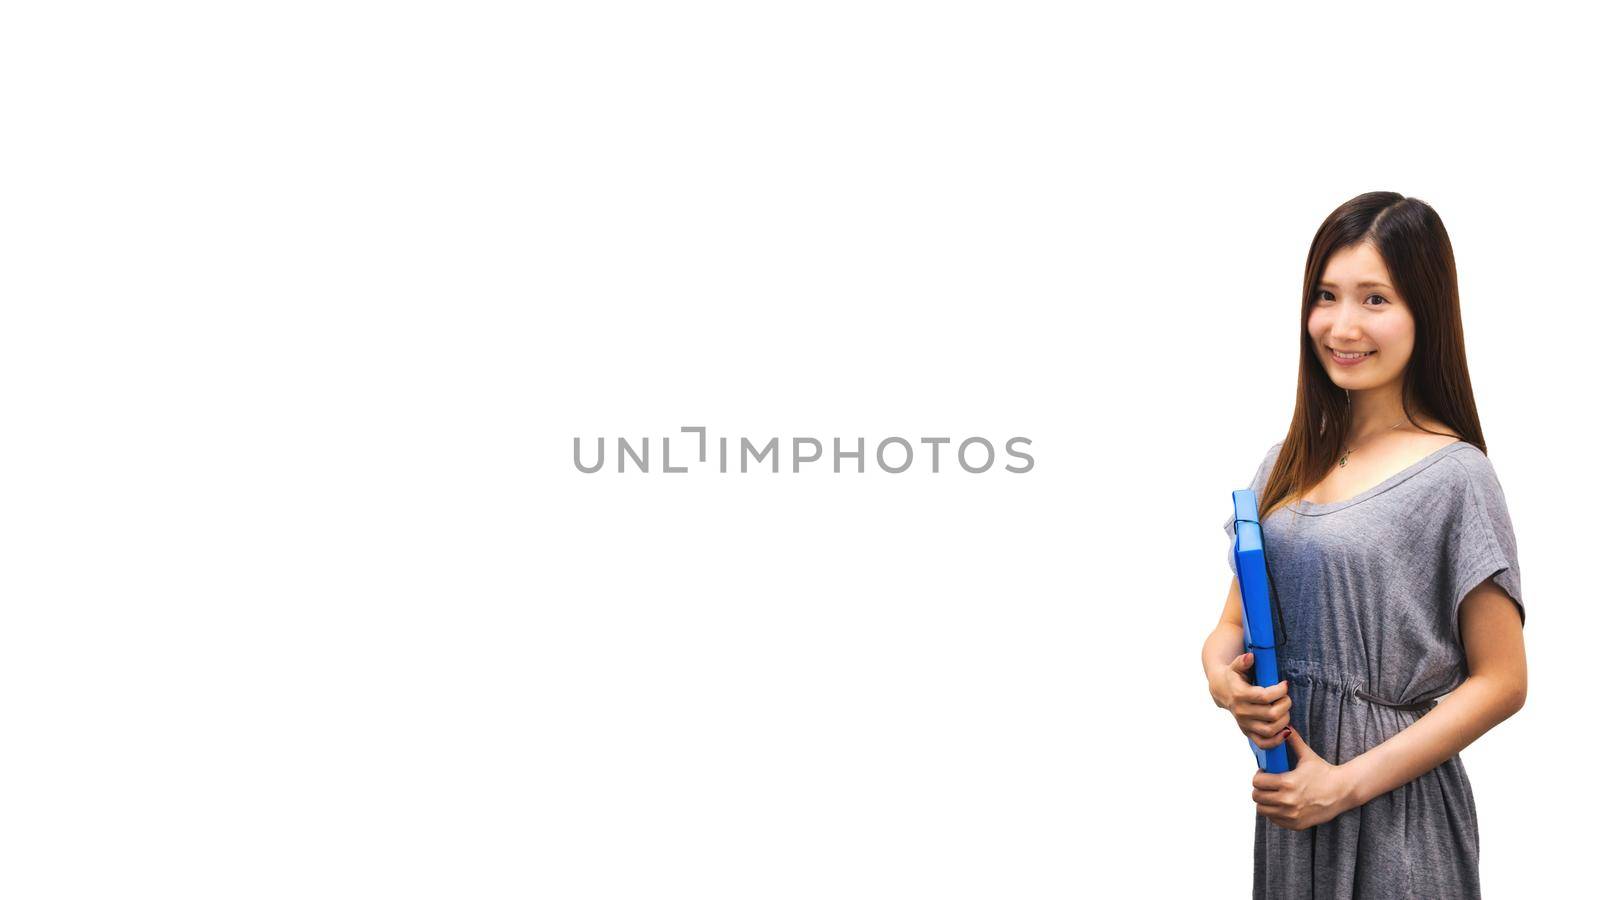 Pretty Japanese woman standing against a pure white background holding a blue plastic folder